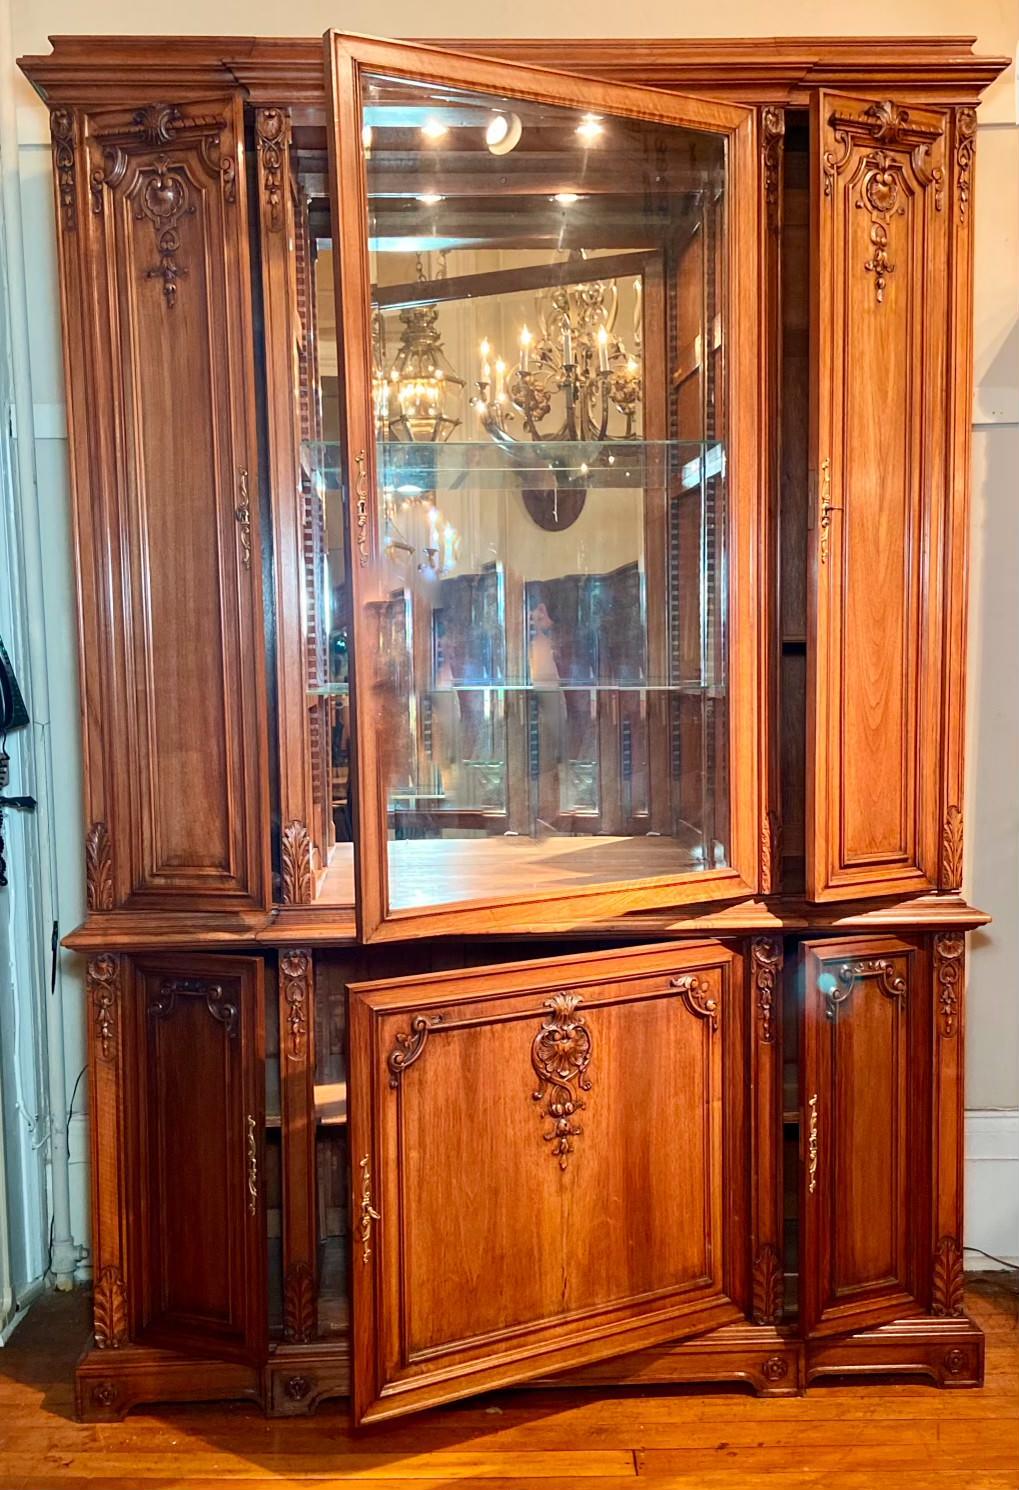 Antique French hand-carved walnut display cabinet, Circa 1890-1910.